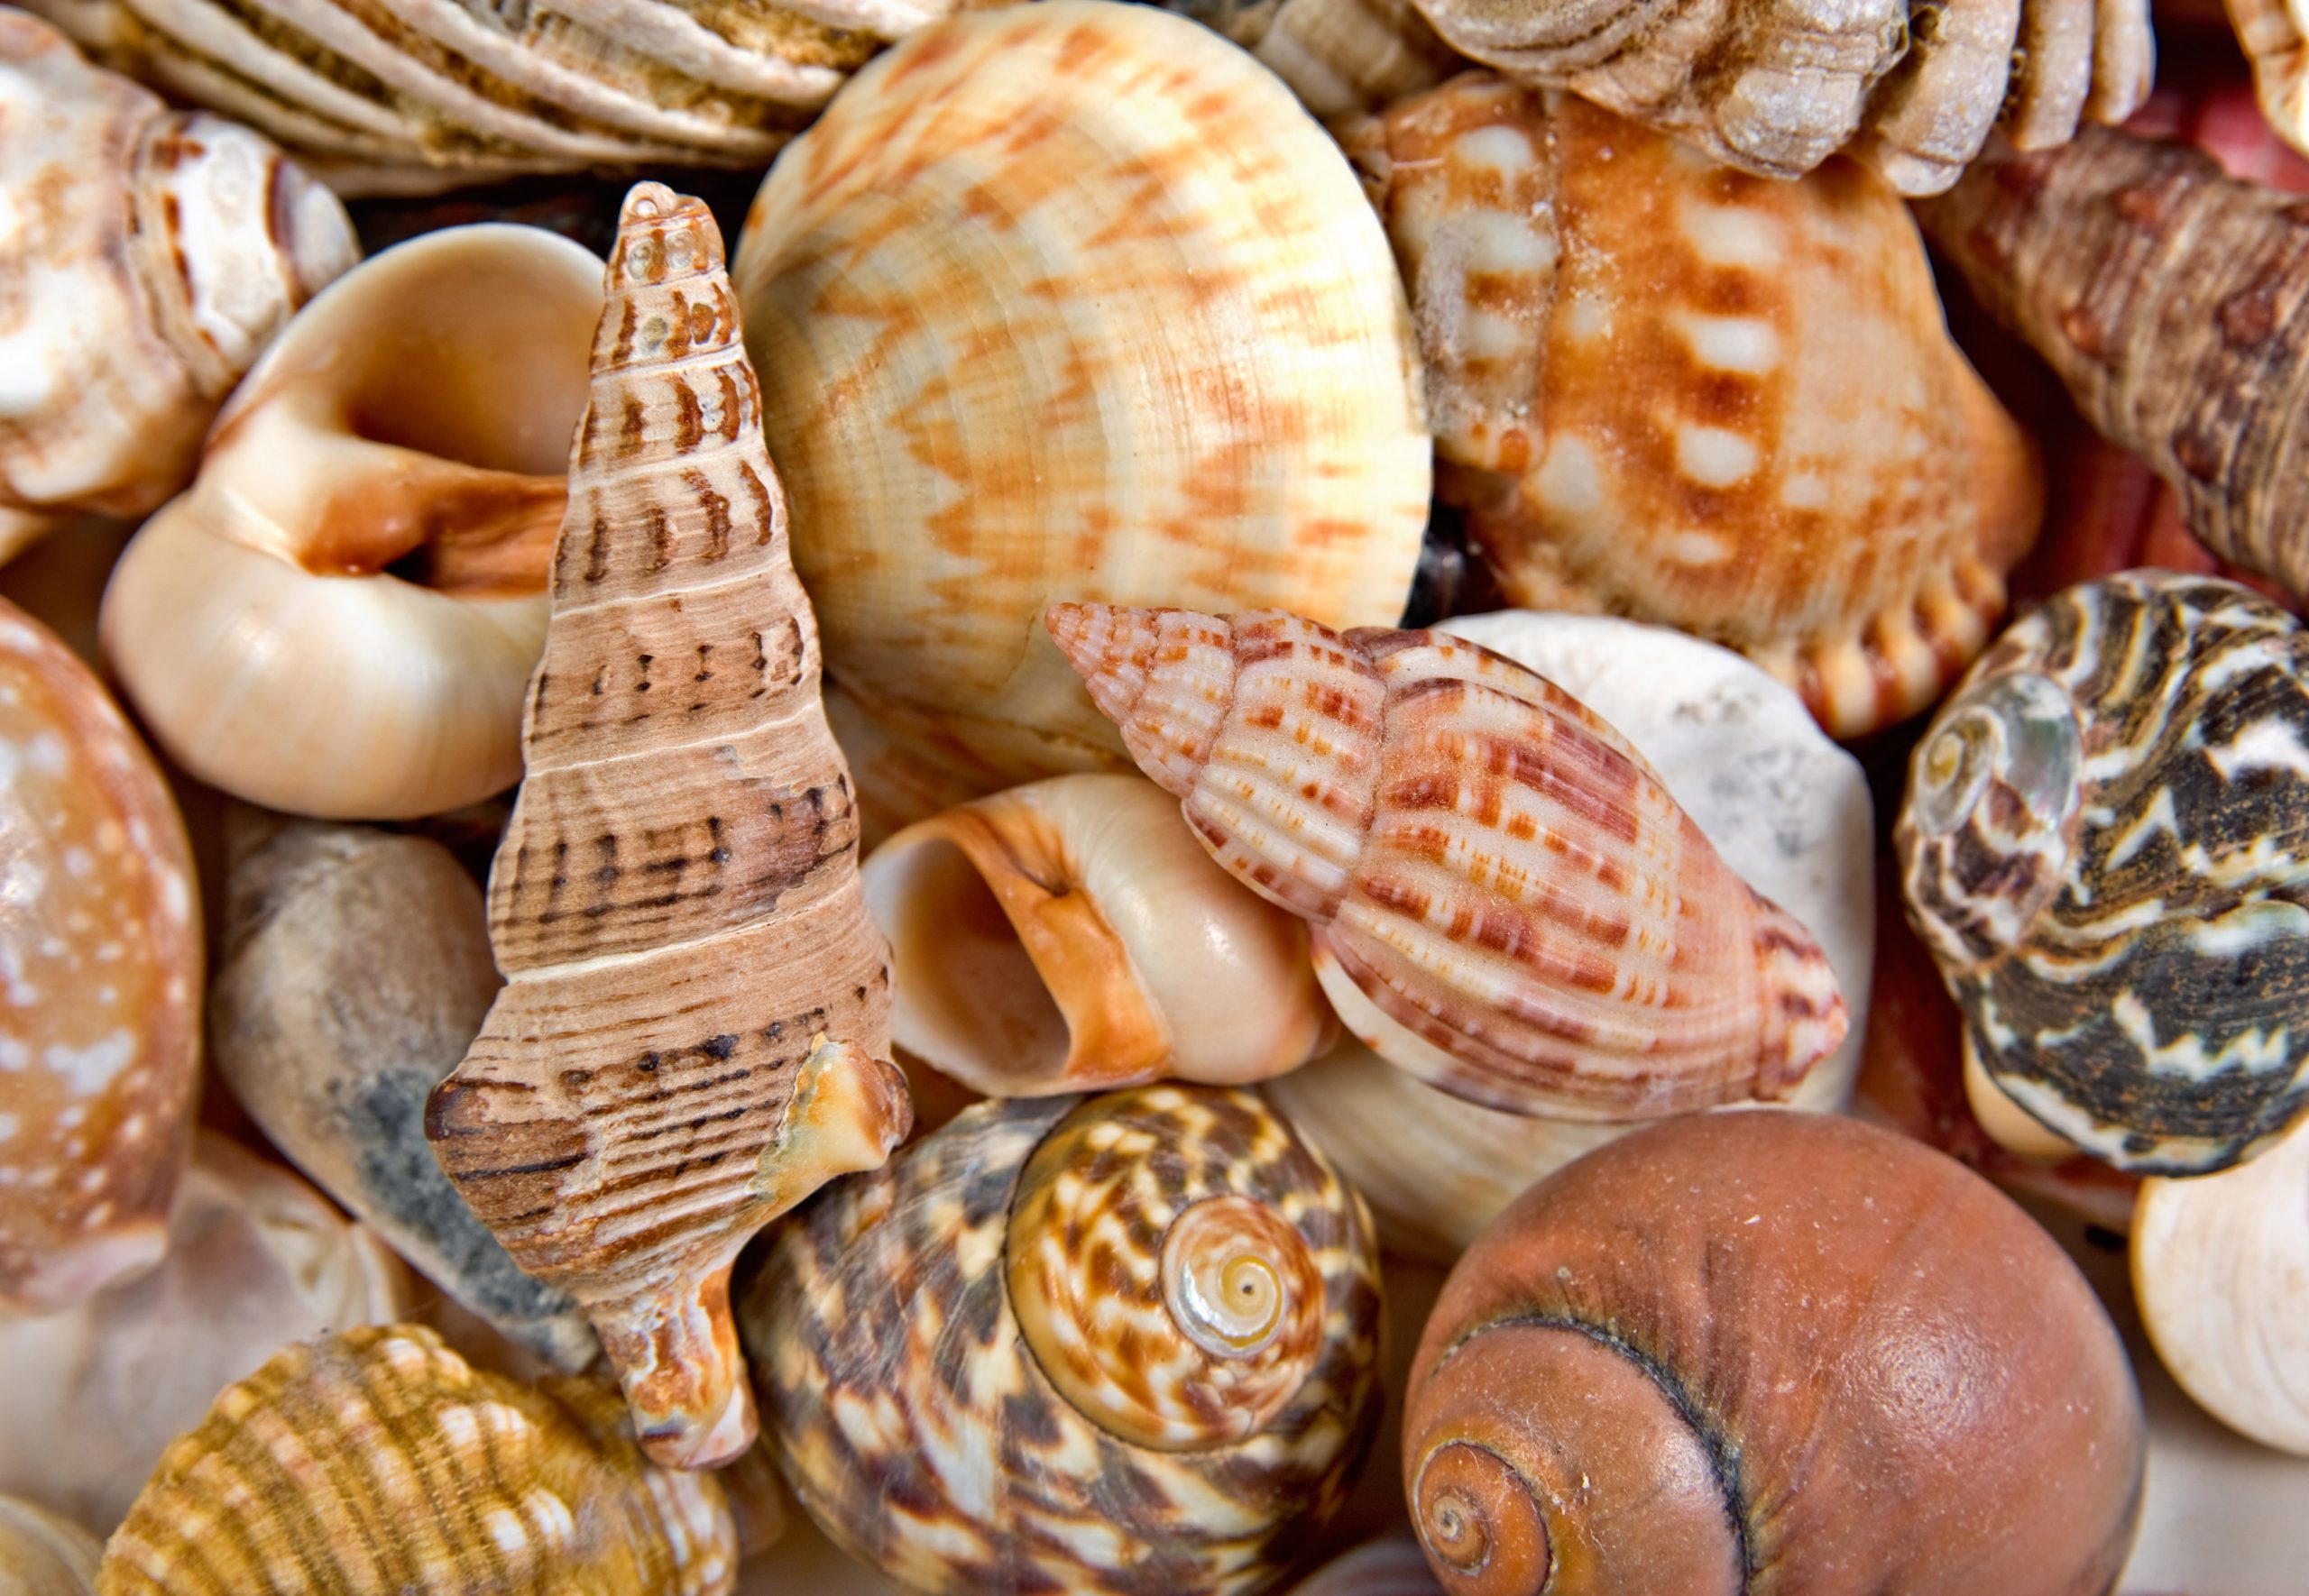 The Best Beaches For Finding Sea Shells